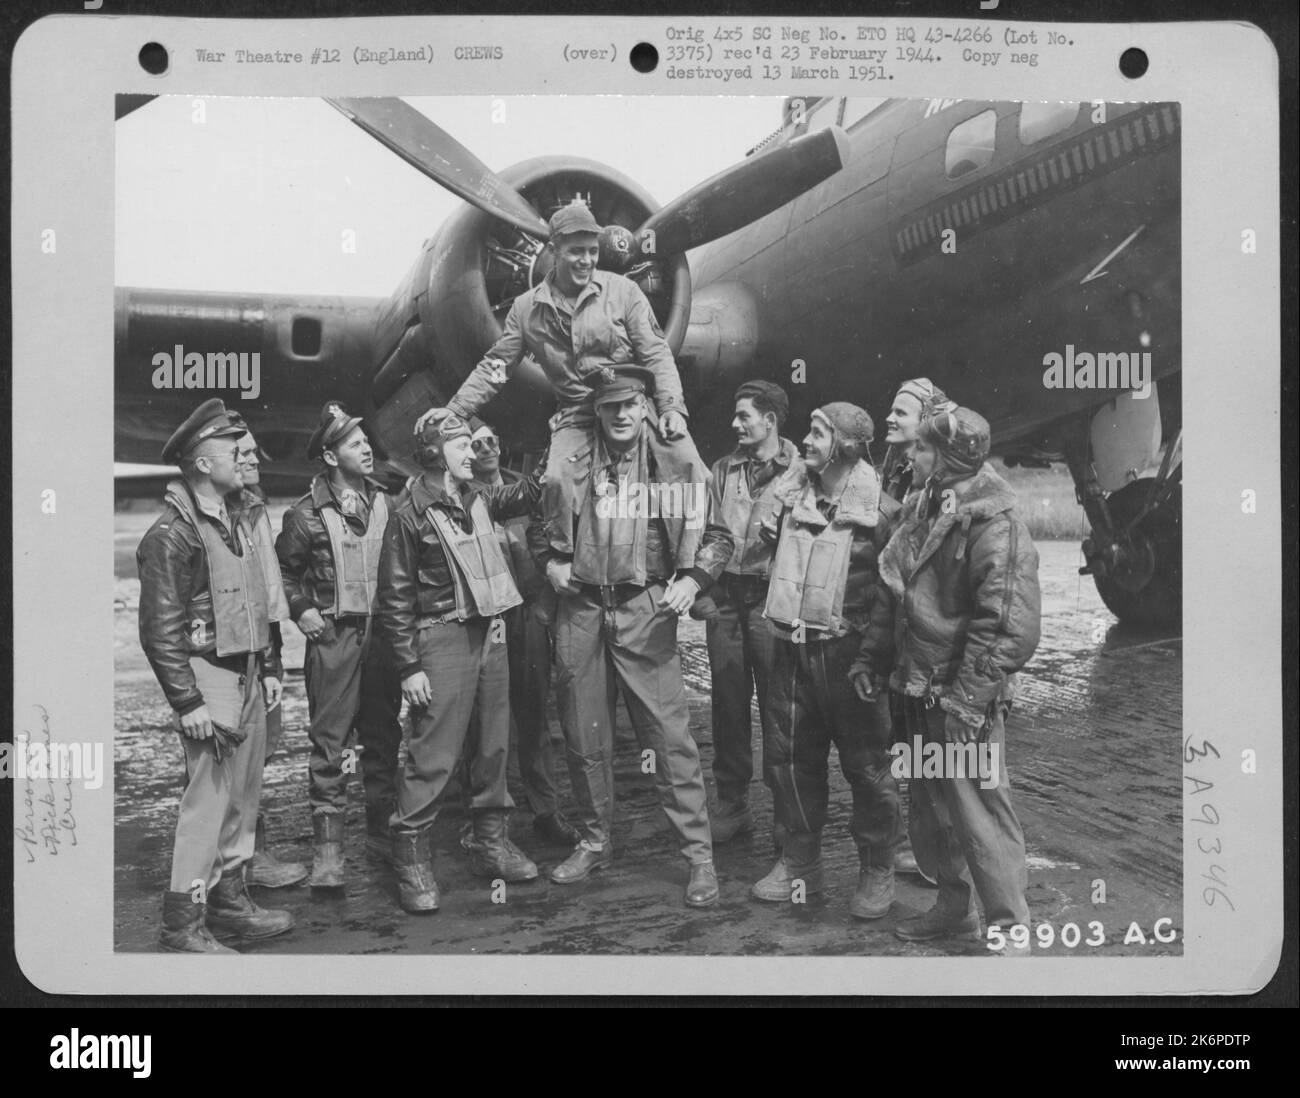 The Crew Of The Boeing B-17 'Hells Angels' Poses After Returning To Their Bases In England After Completing Their 28Th Mission. They Are, Left To Right: Lt. R.W. Joy Of San Francisco, Calif., Co-Pilot; S/Sgt. Harold E. Godwin Of Los Angeles Calif., Tail Stock Photo